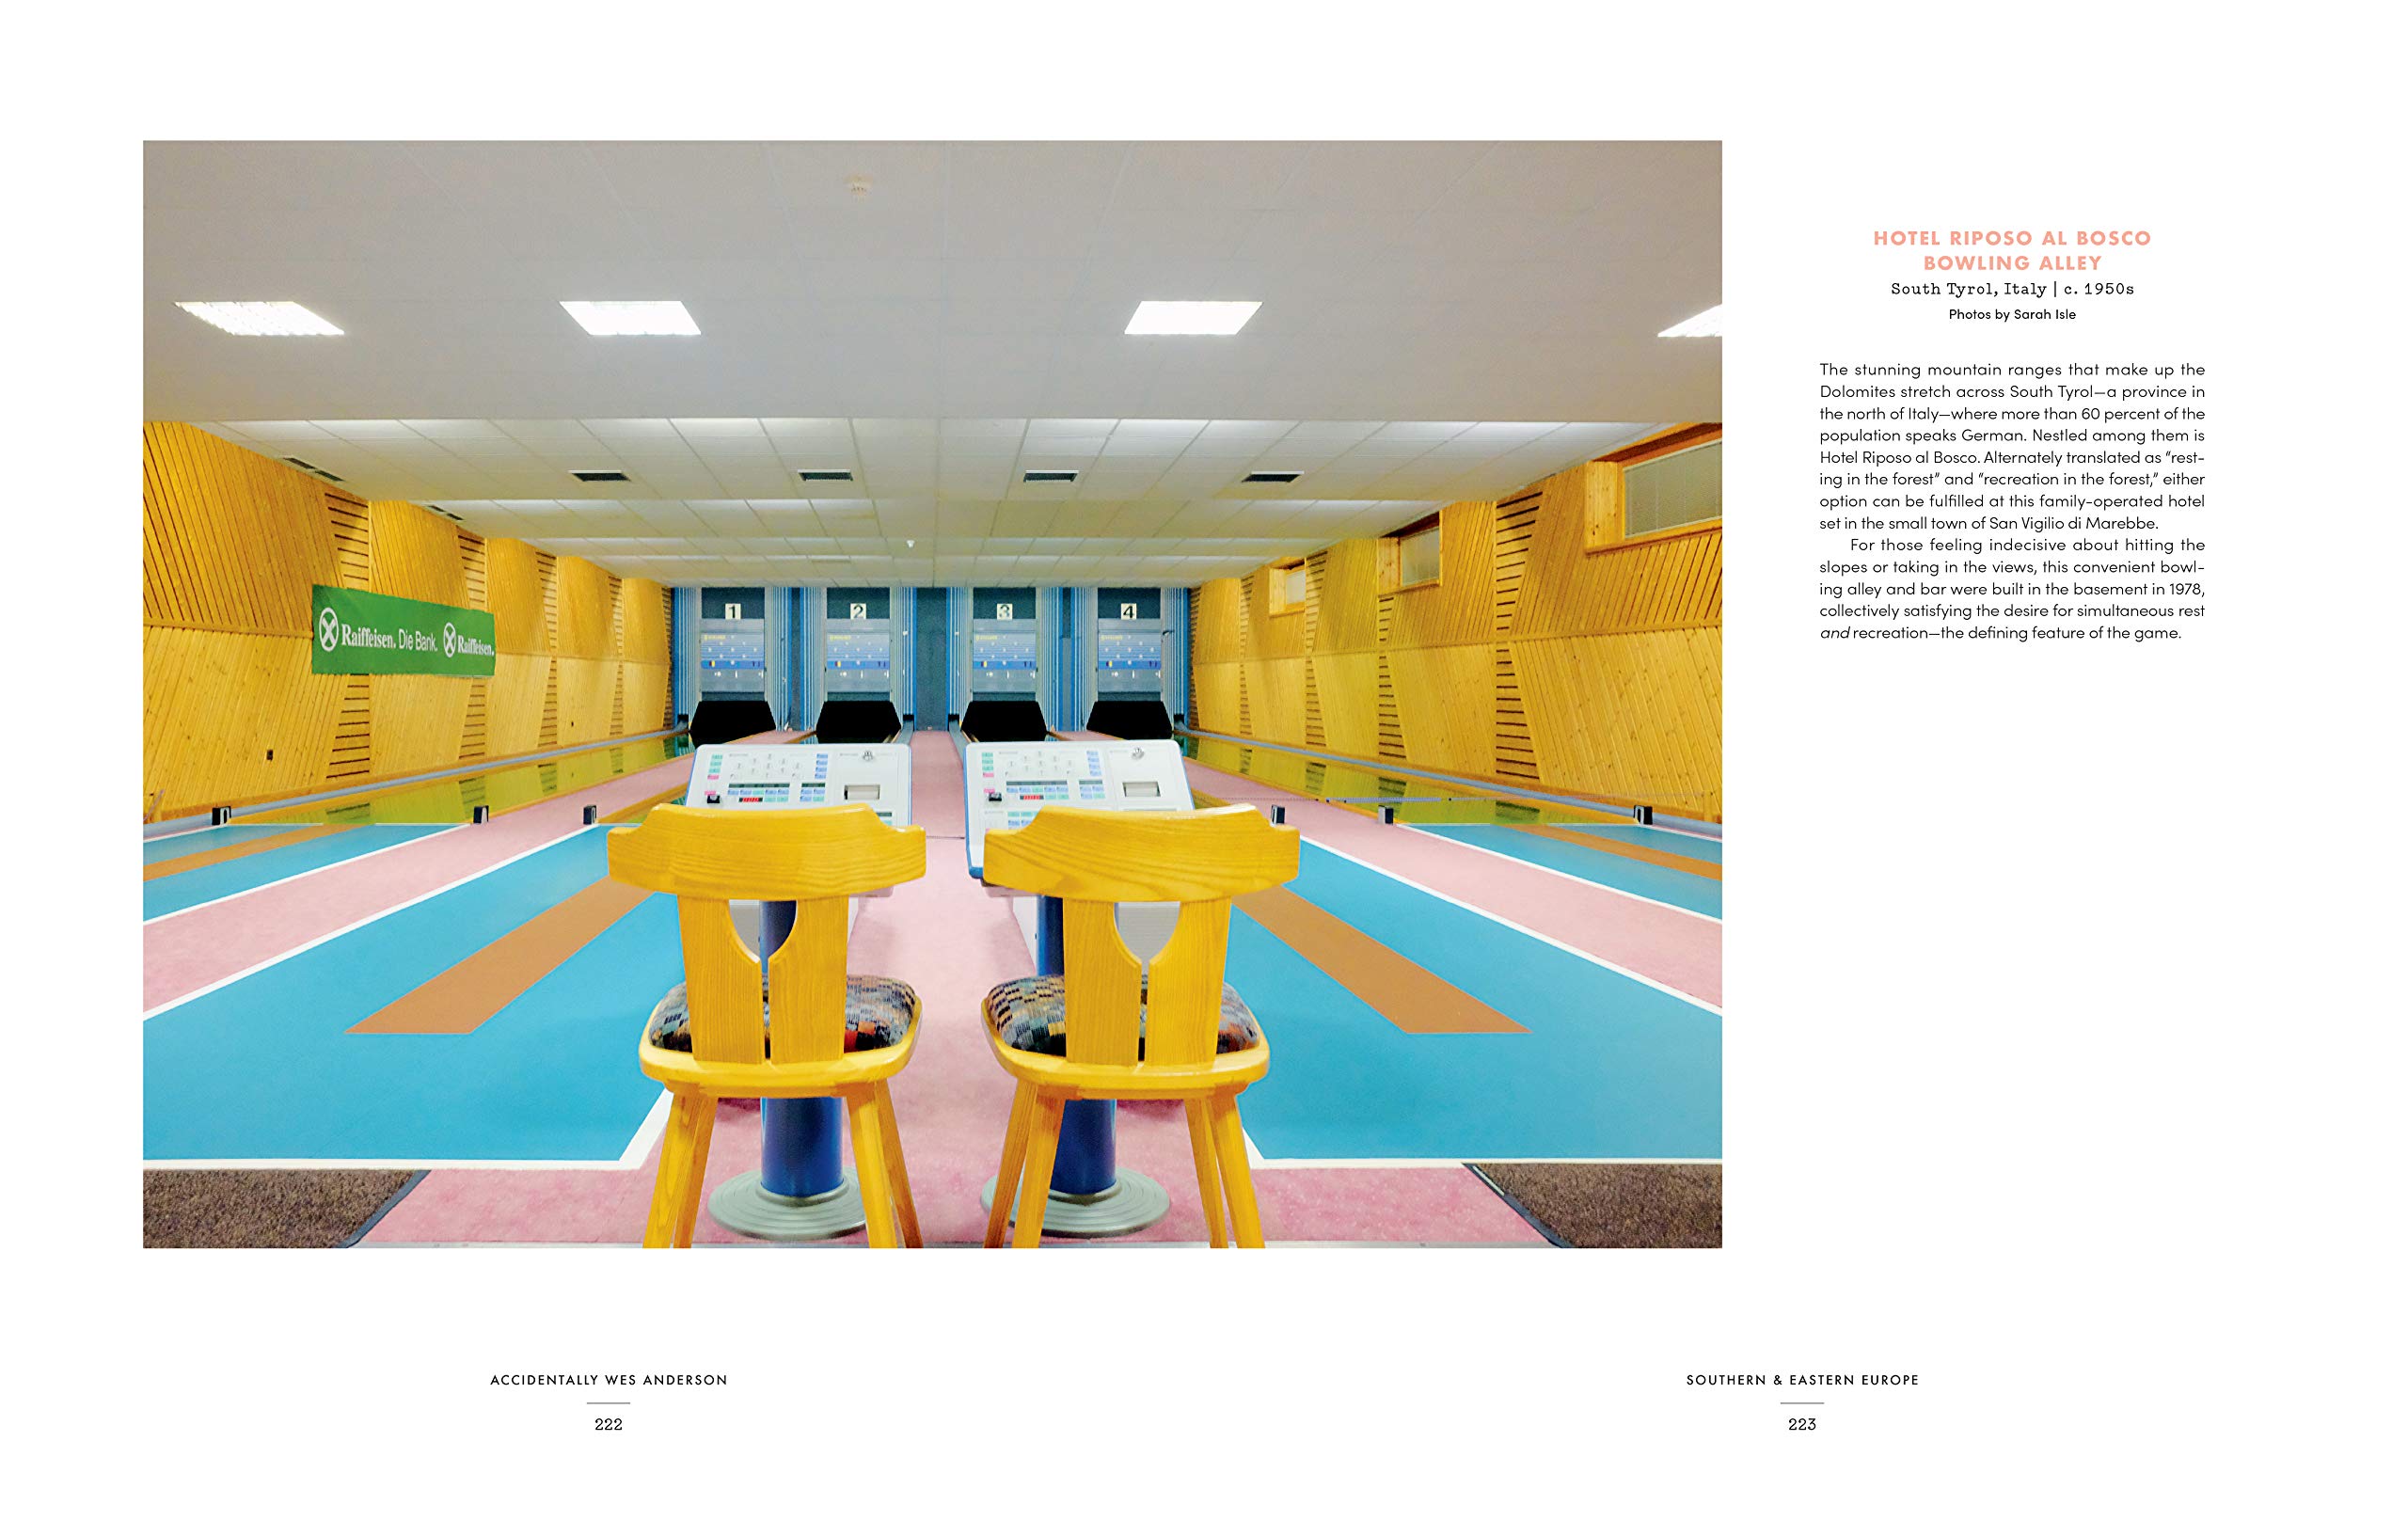 A book page from Accidentally Wes Anderson, showing a bright pastel coloured image of a bowling alley with a caption top right